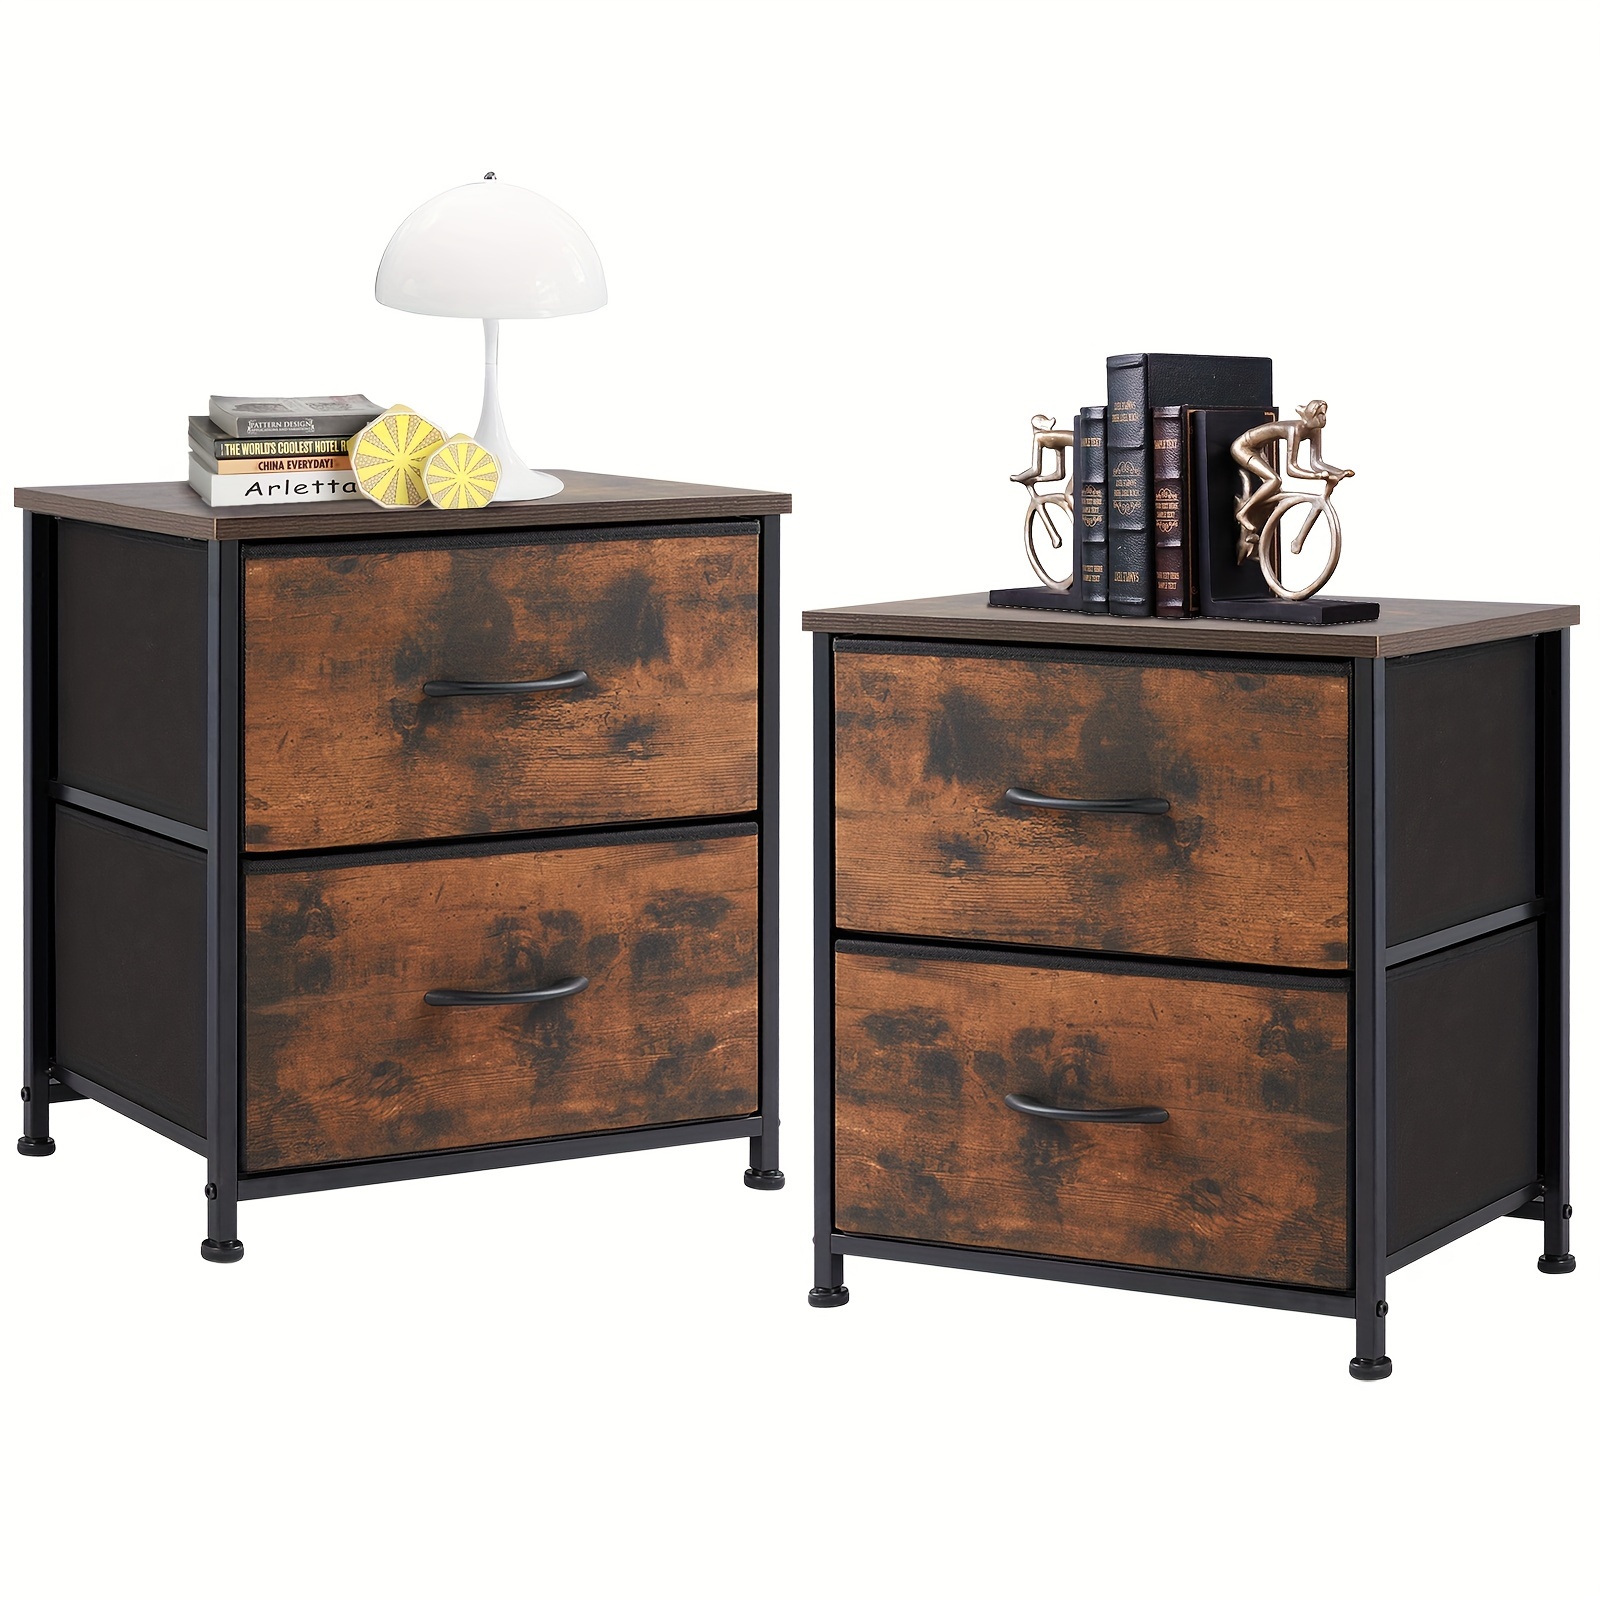 

2pcs Set Metal Frame Bedside Tables With 2 Fabric Storage Drawers, Rustic Nightstand Furniture For Bedroom Storage, Bedside Furniture, For Home Bedroom